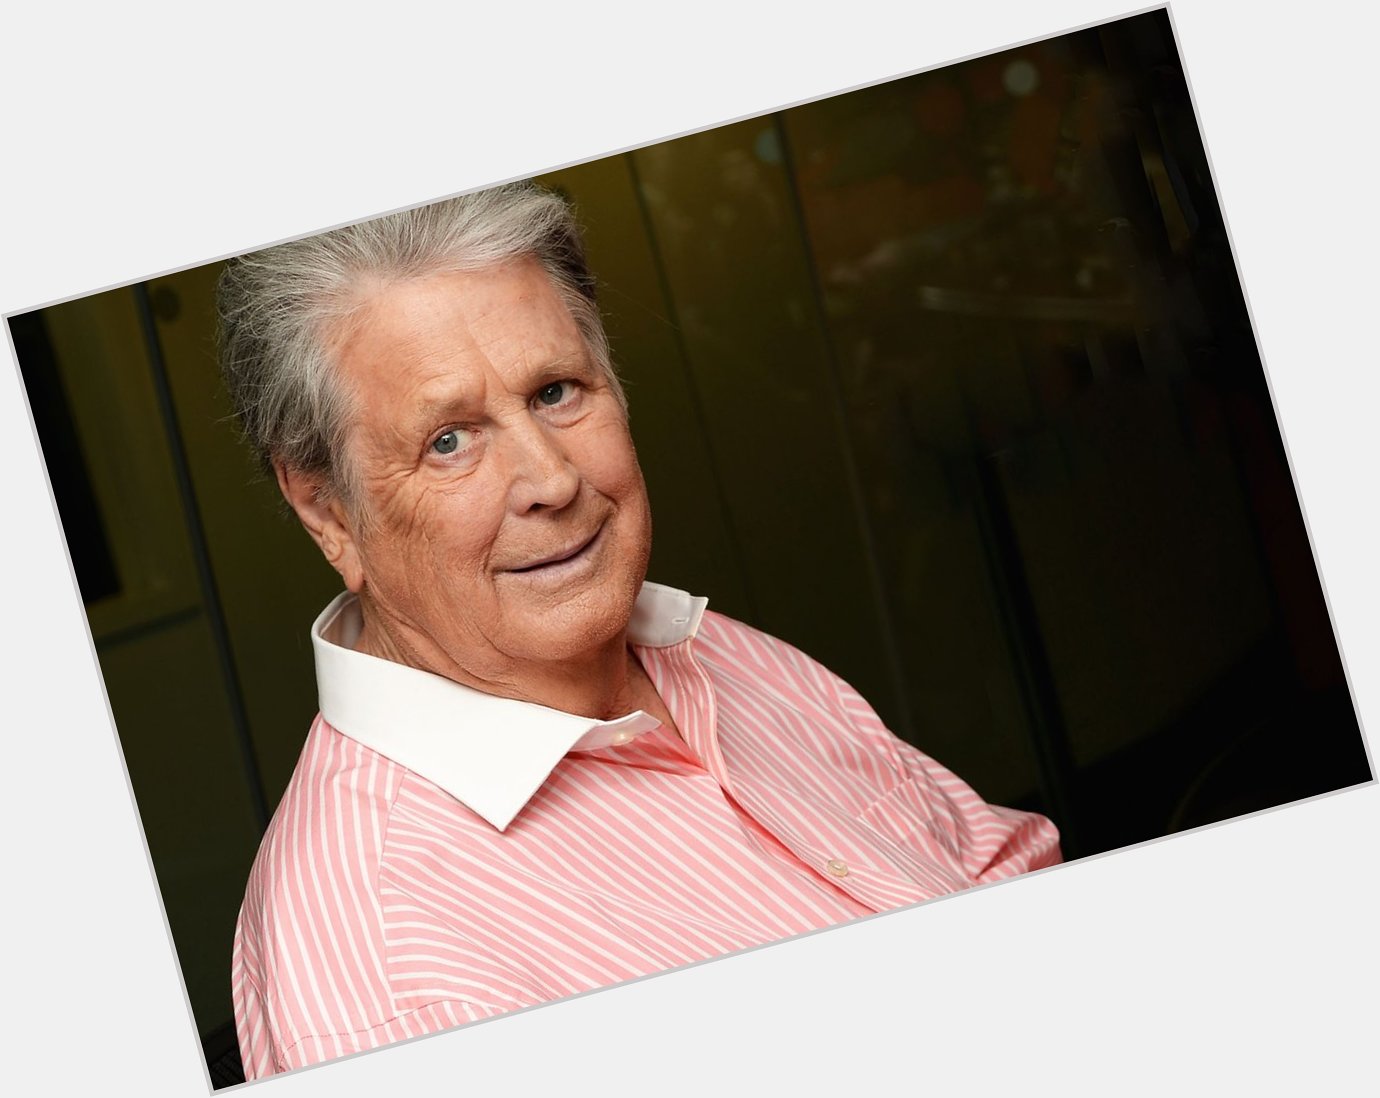 Happy 79 birthday to the one and only Brian Wilson from The Beach Boys! 